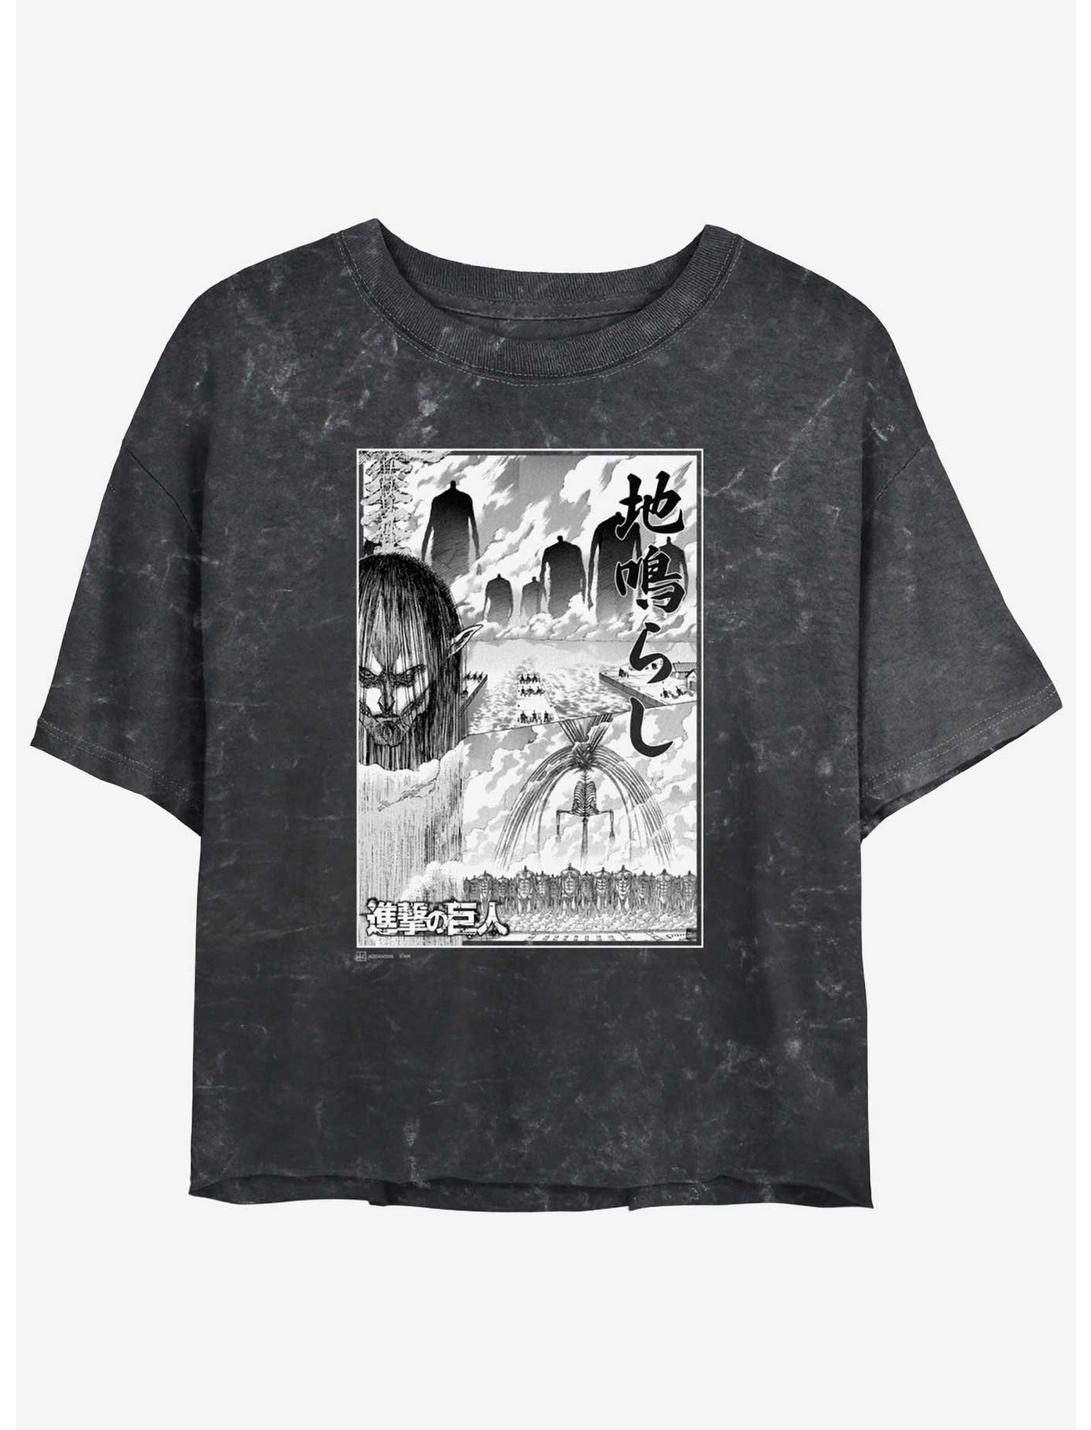 Attack on Titan The Rumbling Poster Girls Mineral Wash Crop T-Shirt, BLACK, hi-res